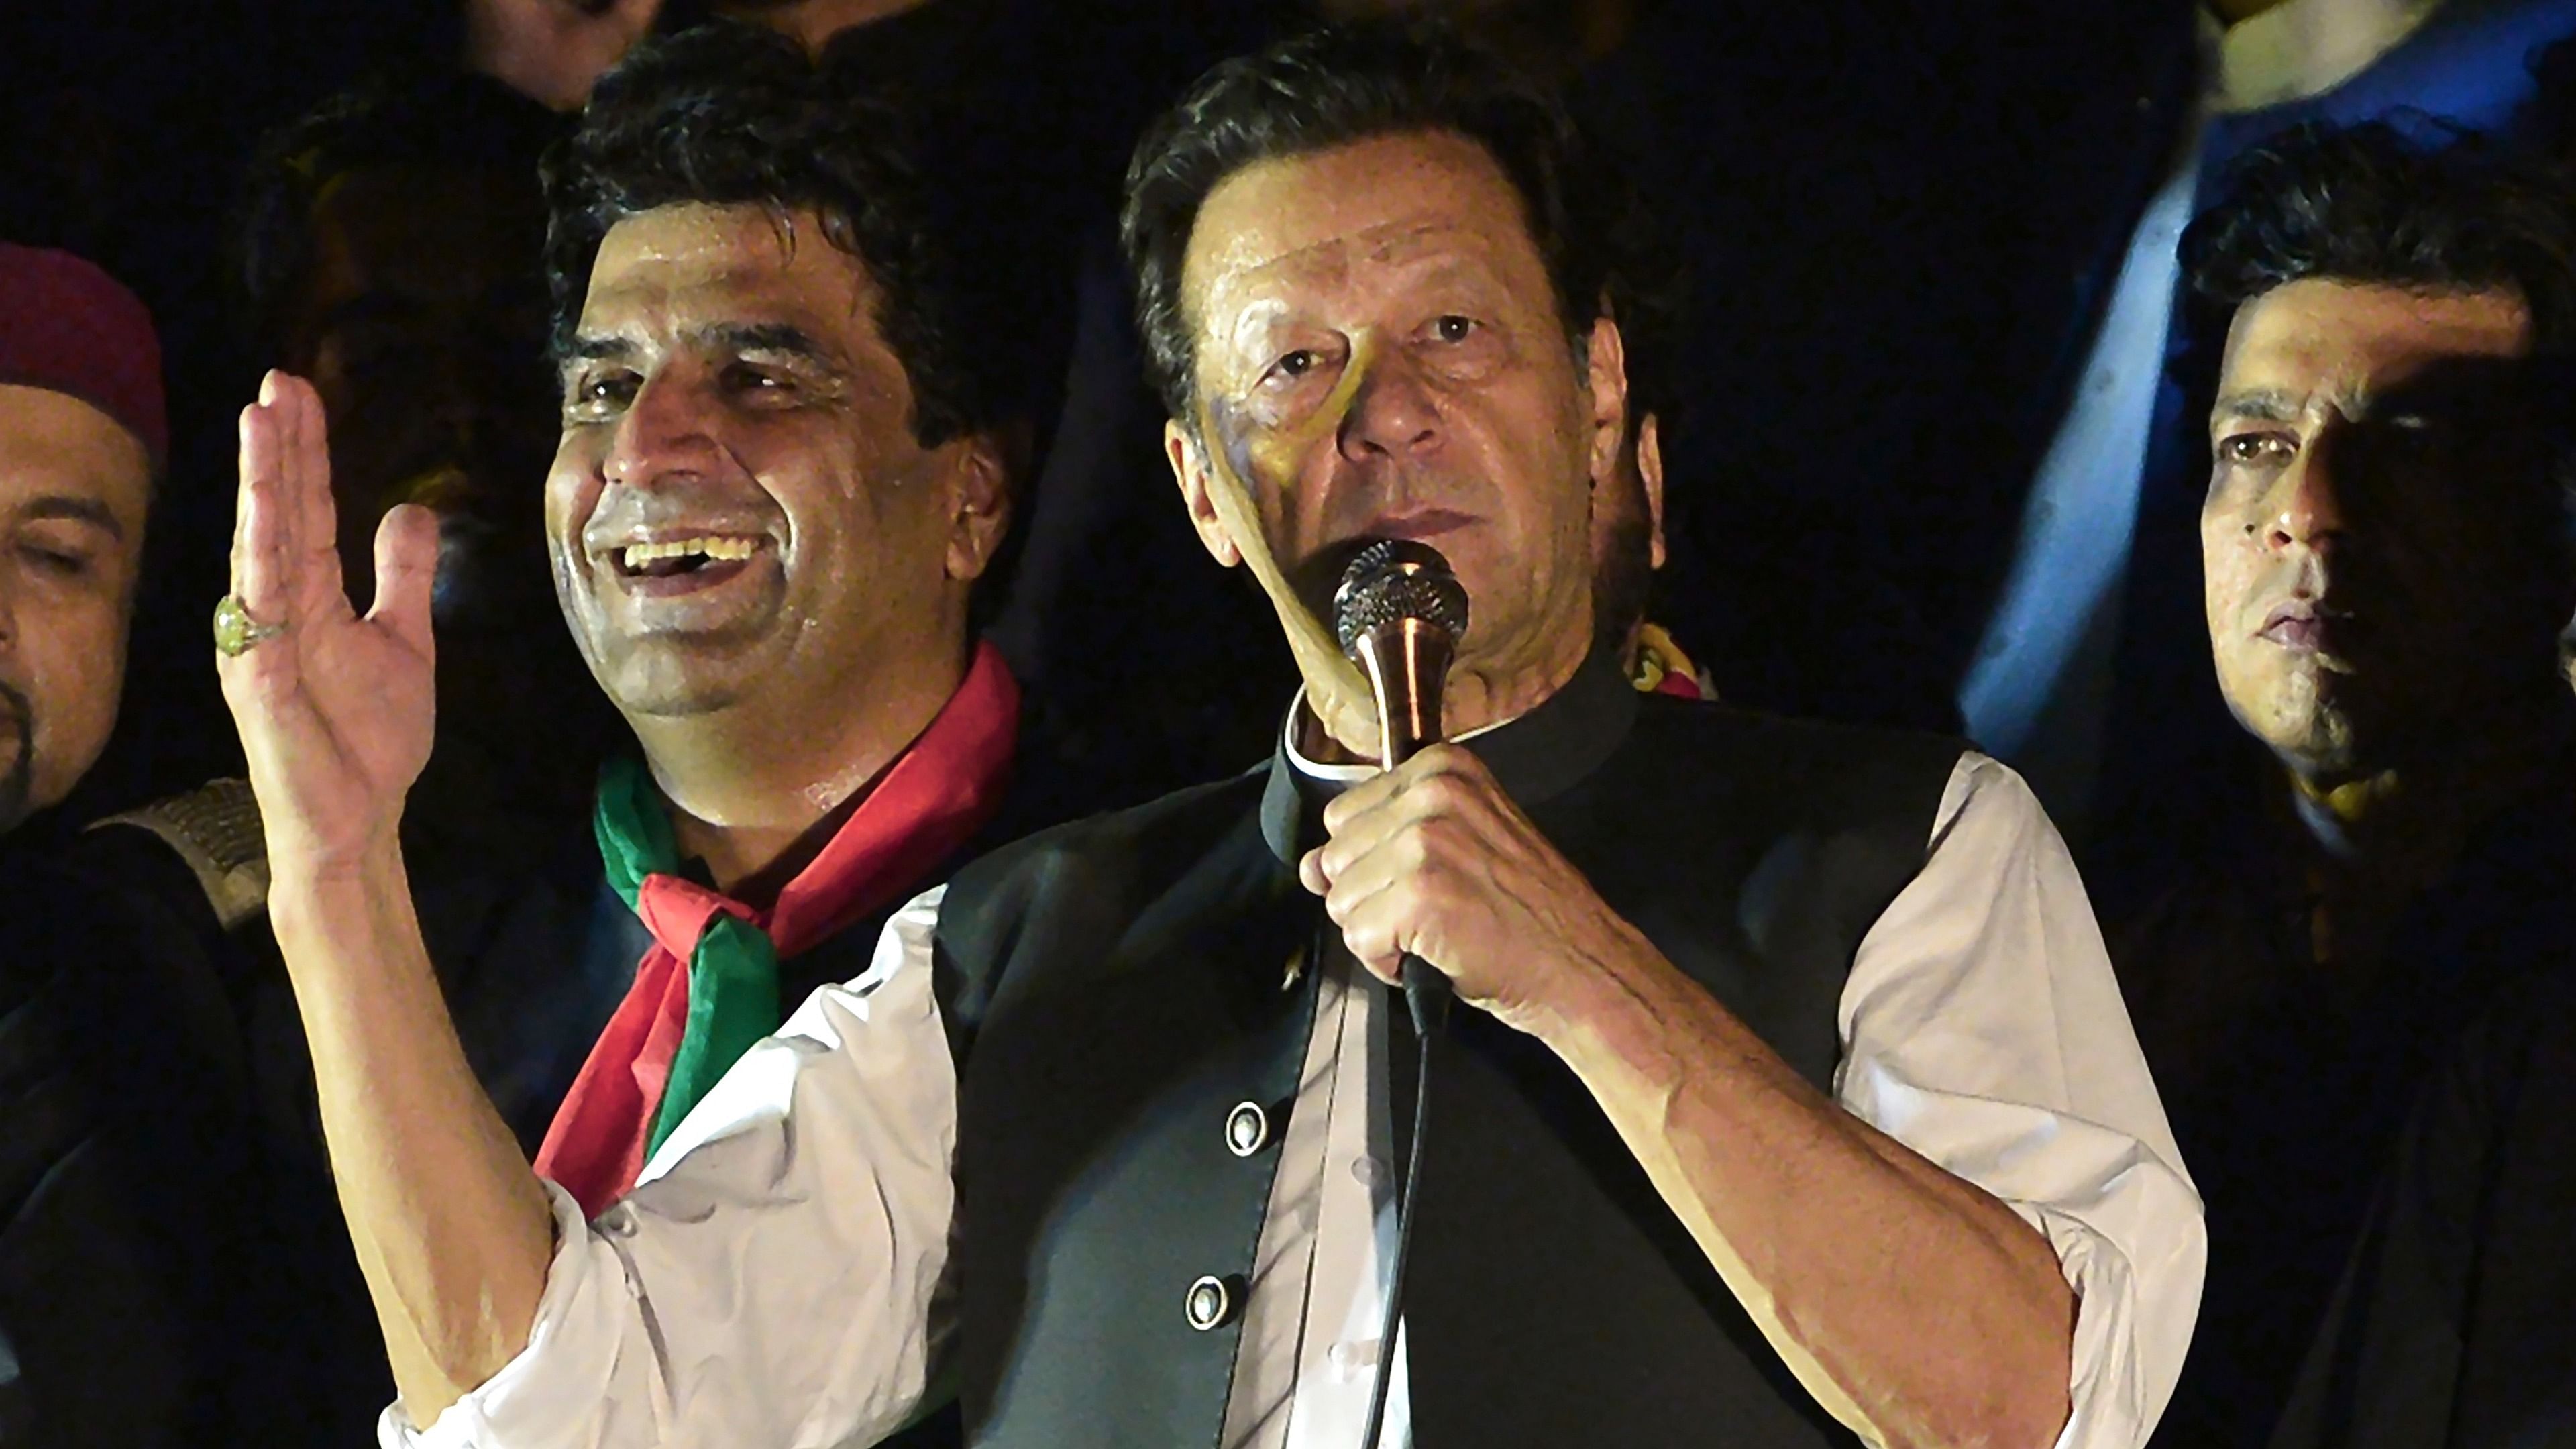 Imran Khan's political party, the Pakistan Tehreek-e-Insaf (PTI), has dismissed the accusations against Khan as being politically motivated. Credit: AP Photo